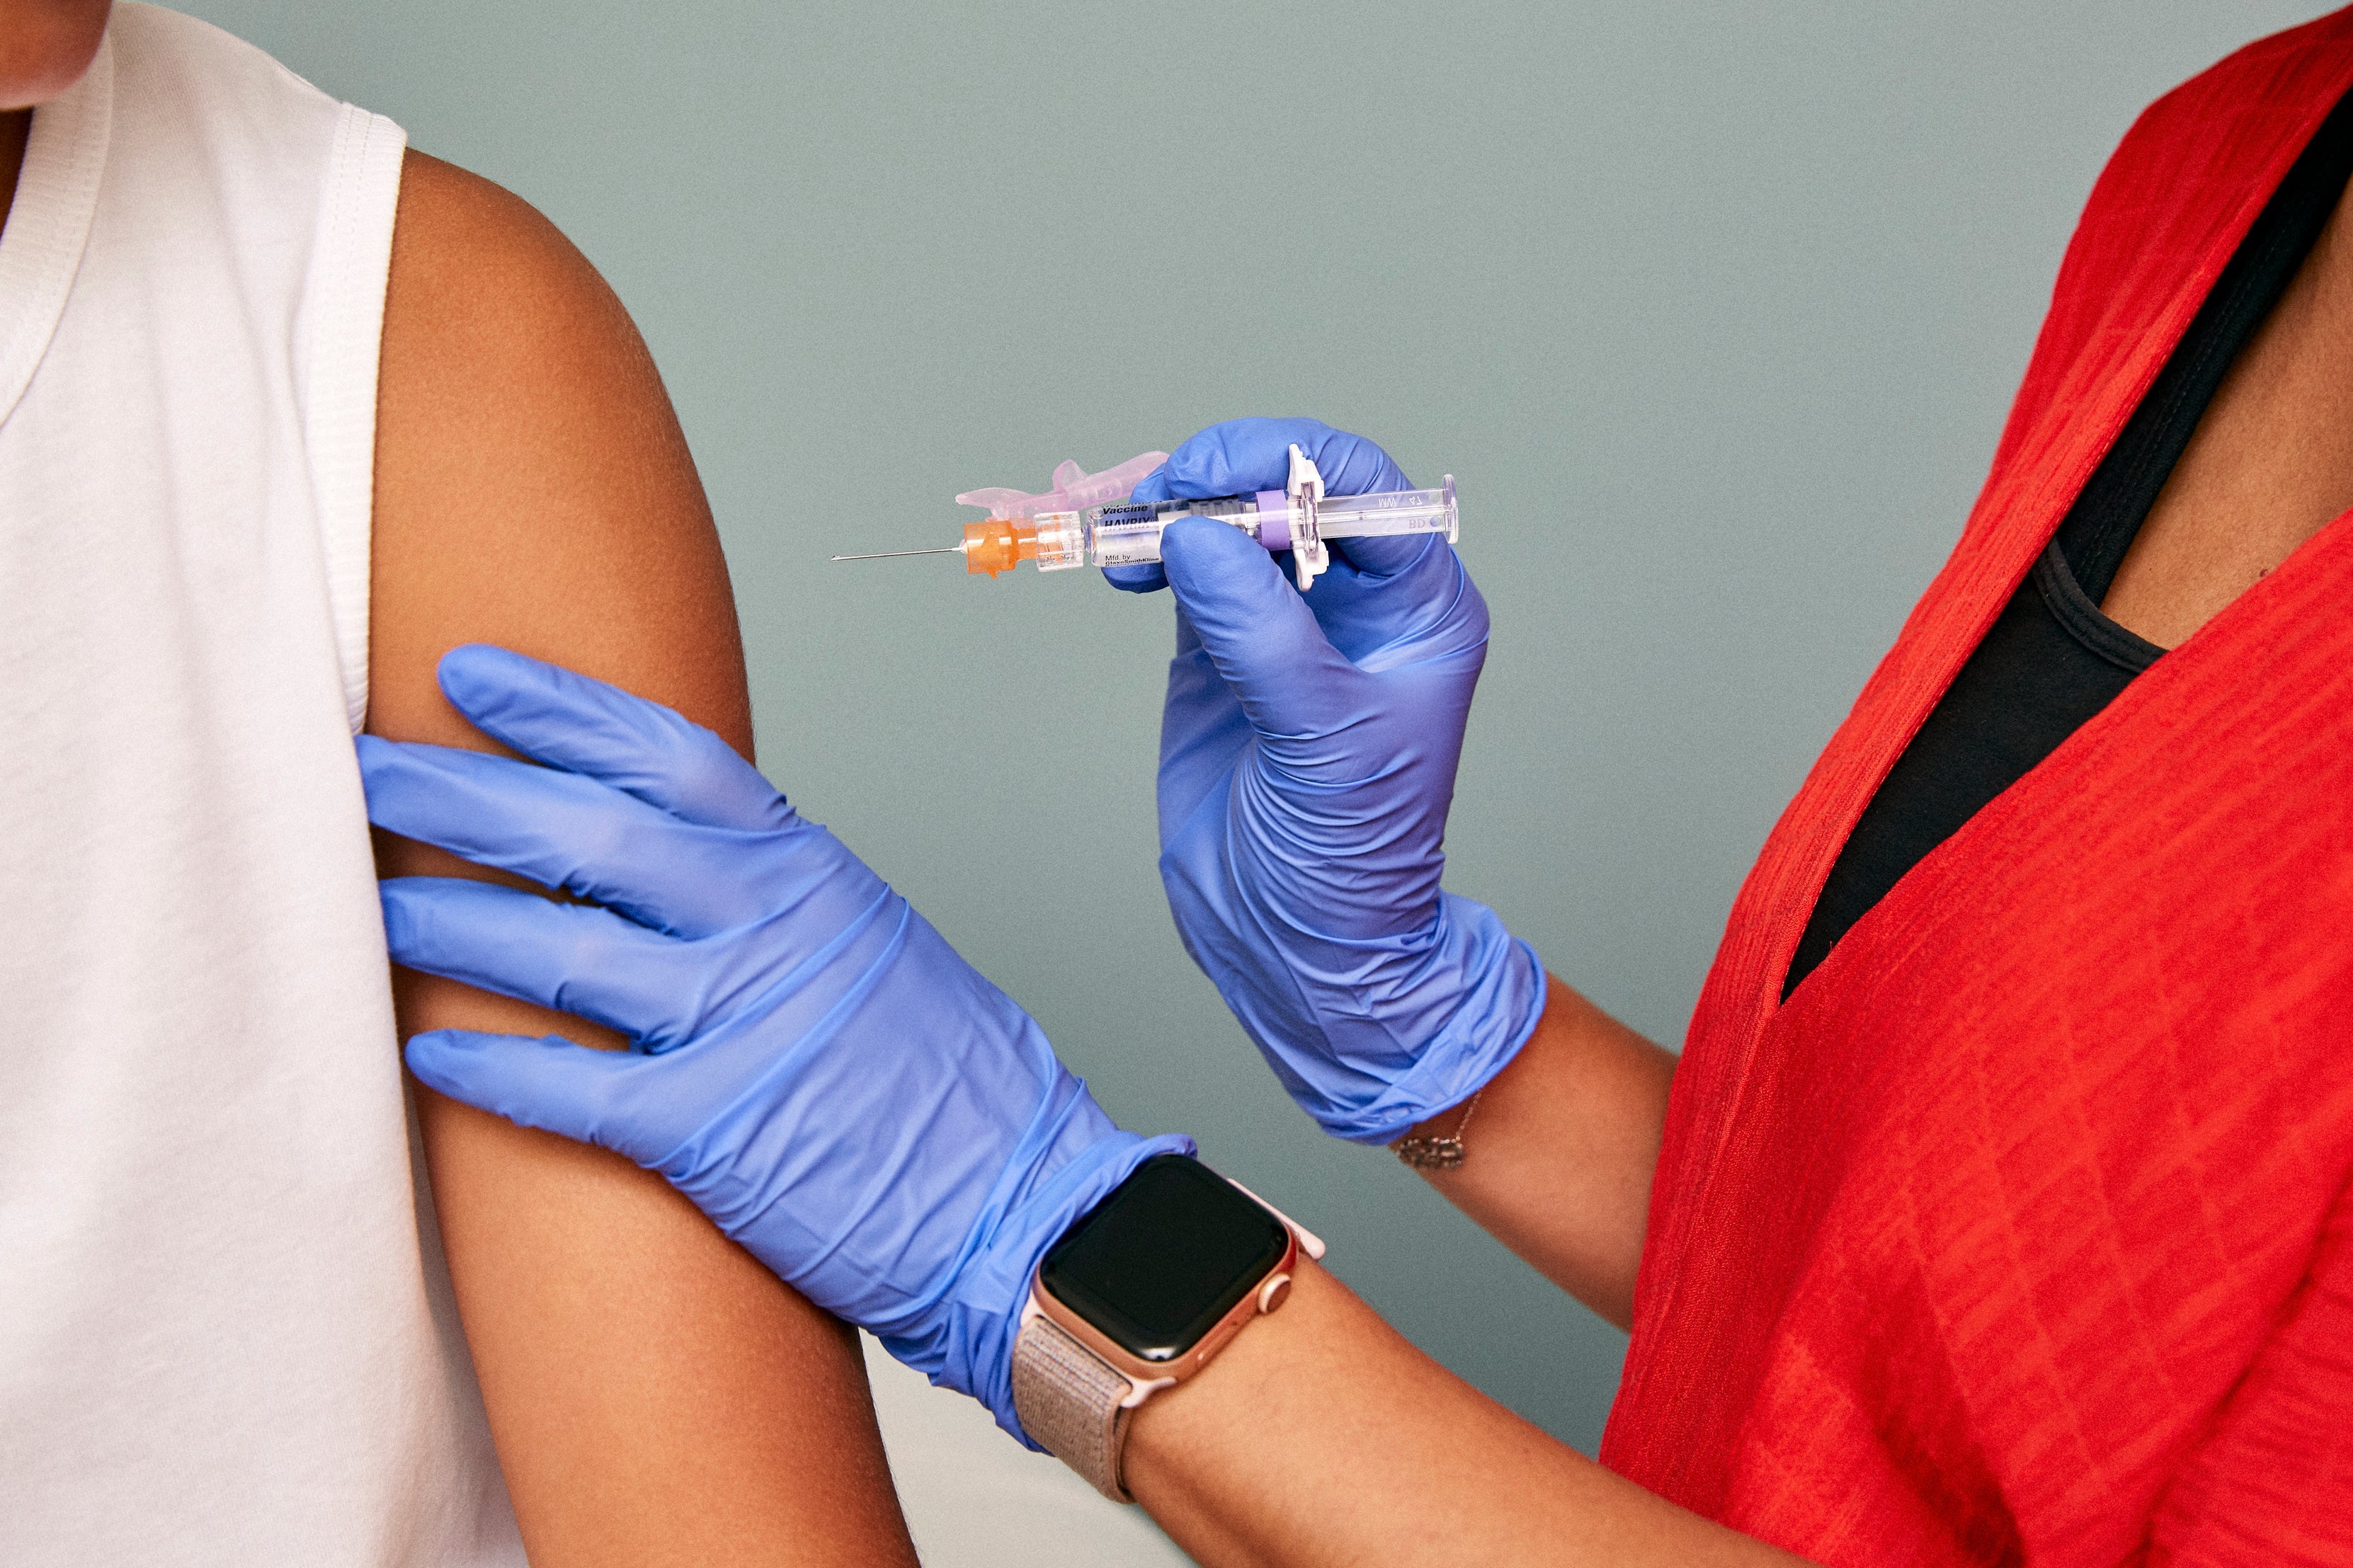 A medical professional wearing gloves holds a syringe up to a patient's upper arm